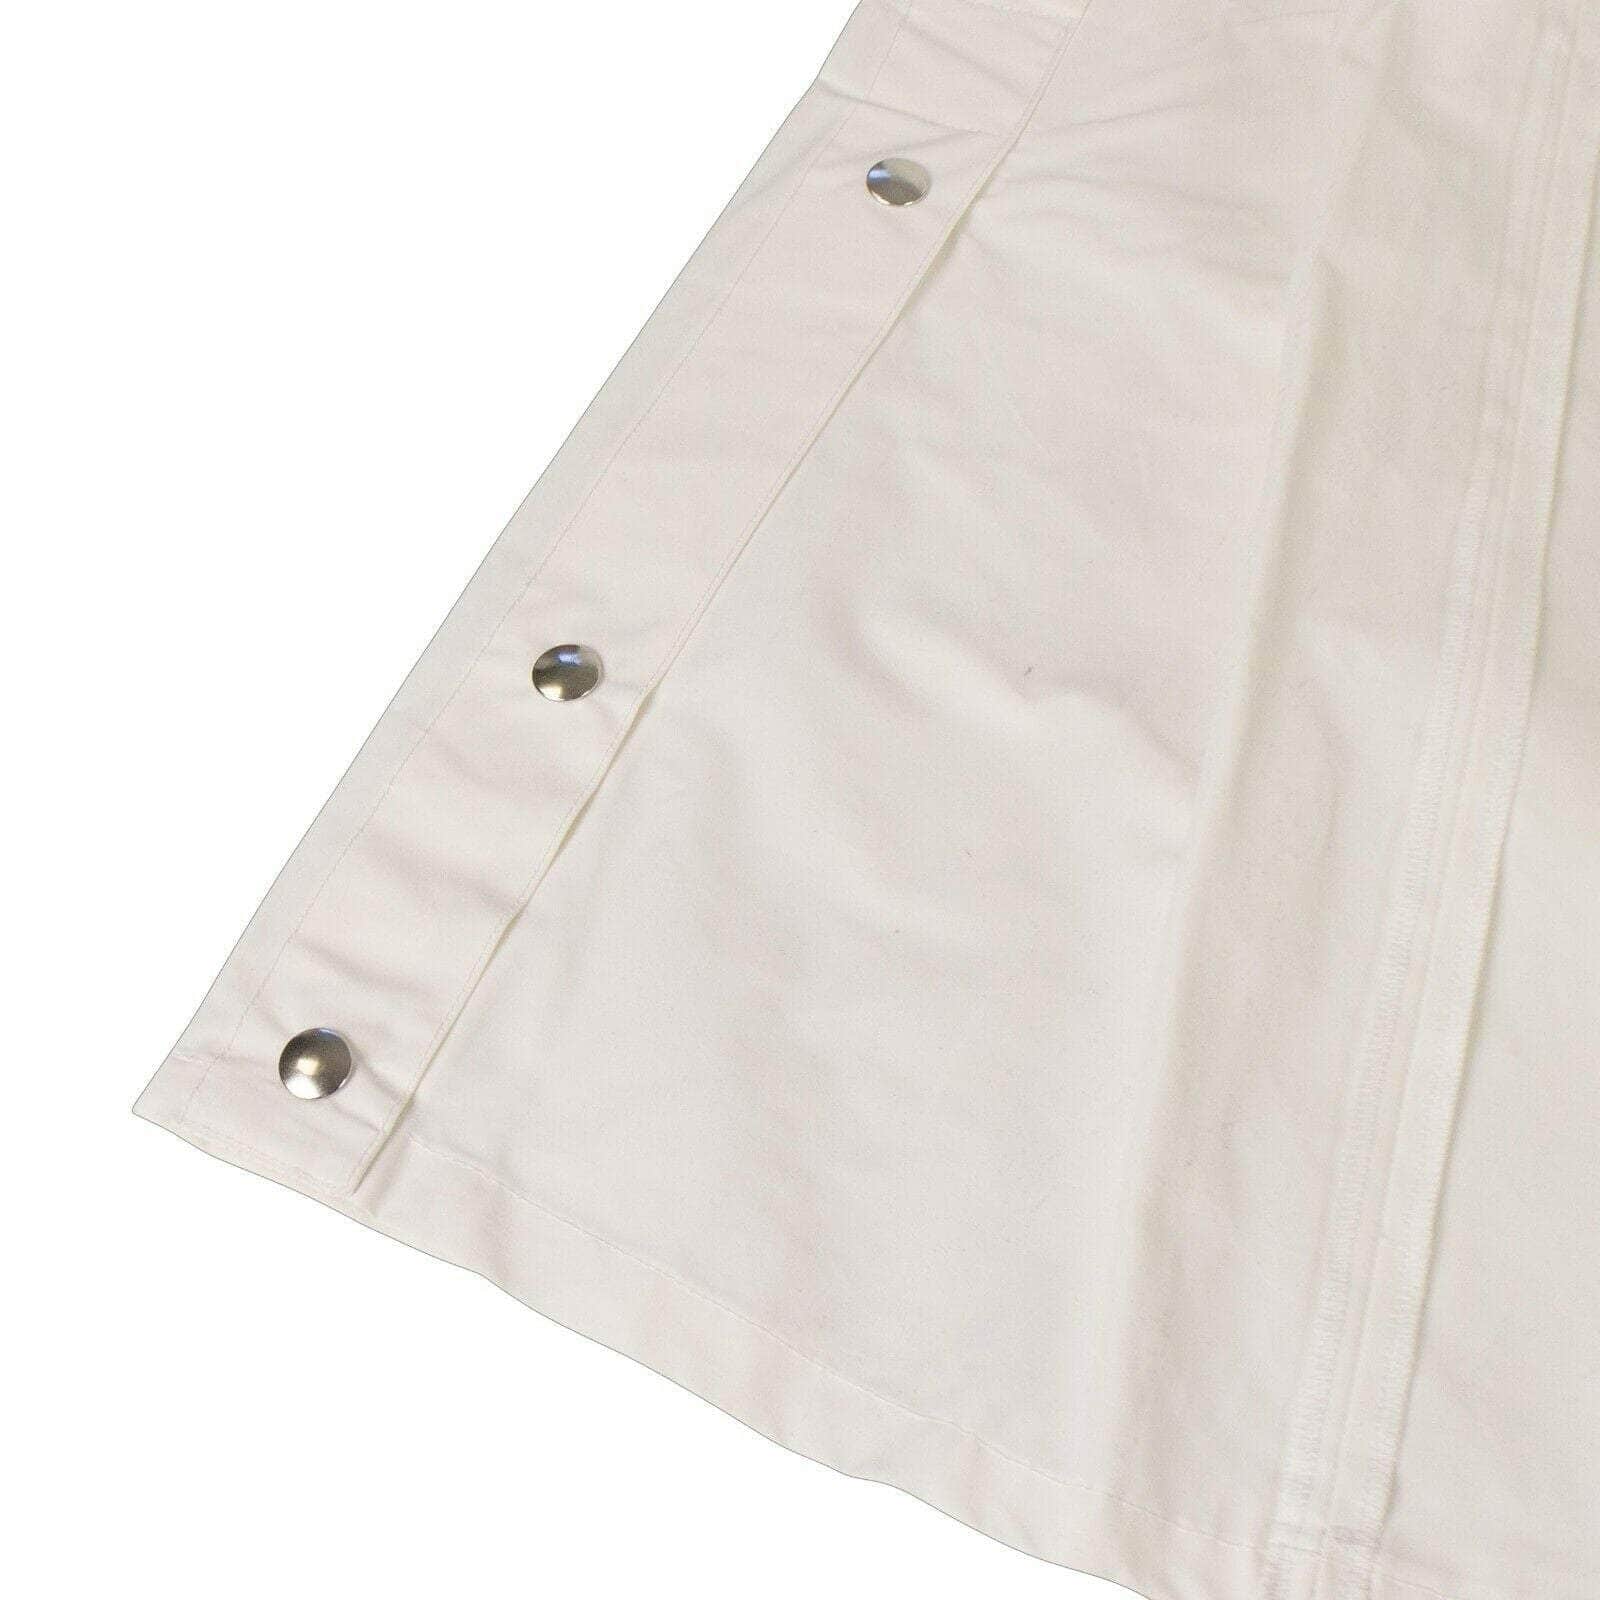 A-COLD-WALL* 250-500, a-cold-wall, couponcollection, gender-womens, main-clothing, size-m, size-s, womens-skirts S Cotton Snap Midi Skirt - White 87AB-ACW-1026/S 87AB-ACW-1026/S